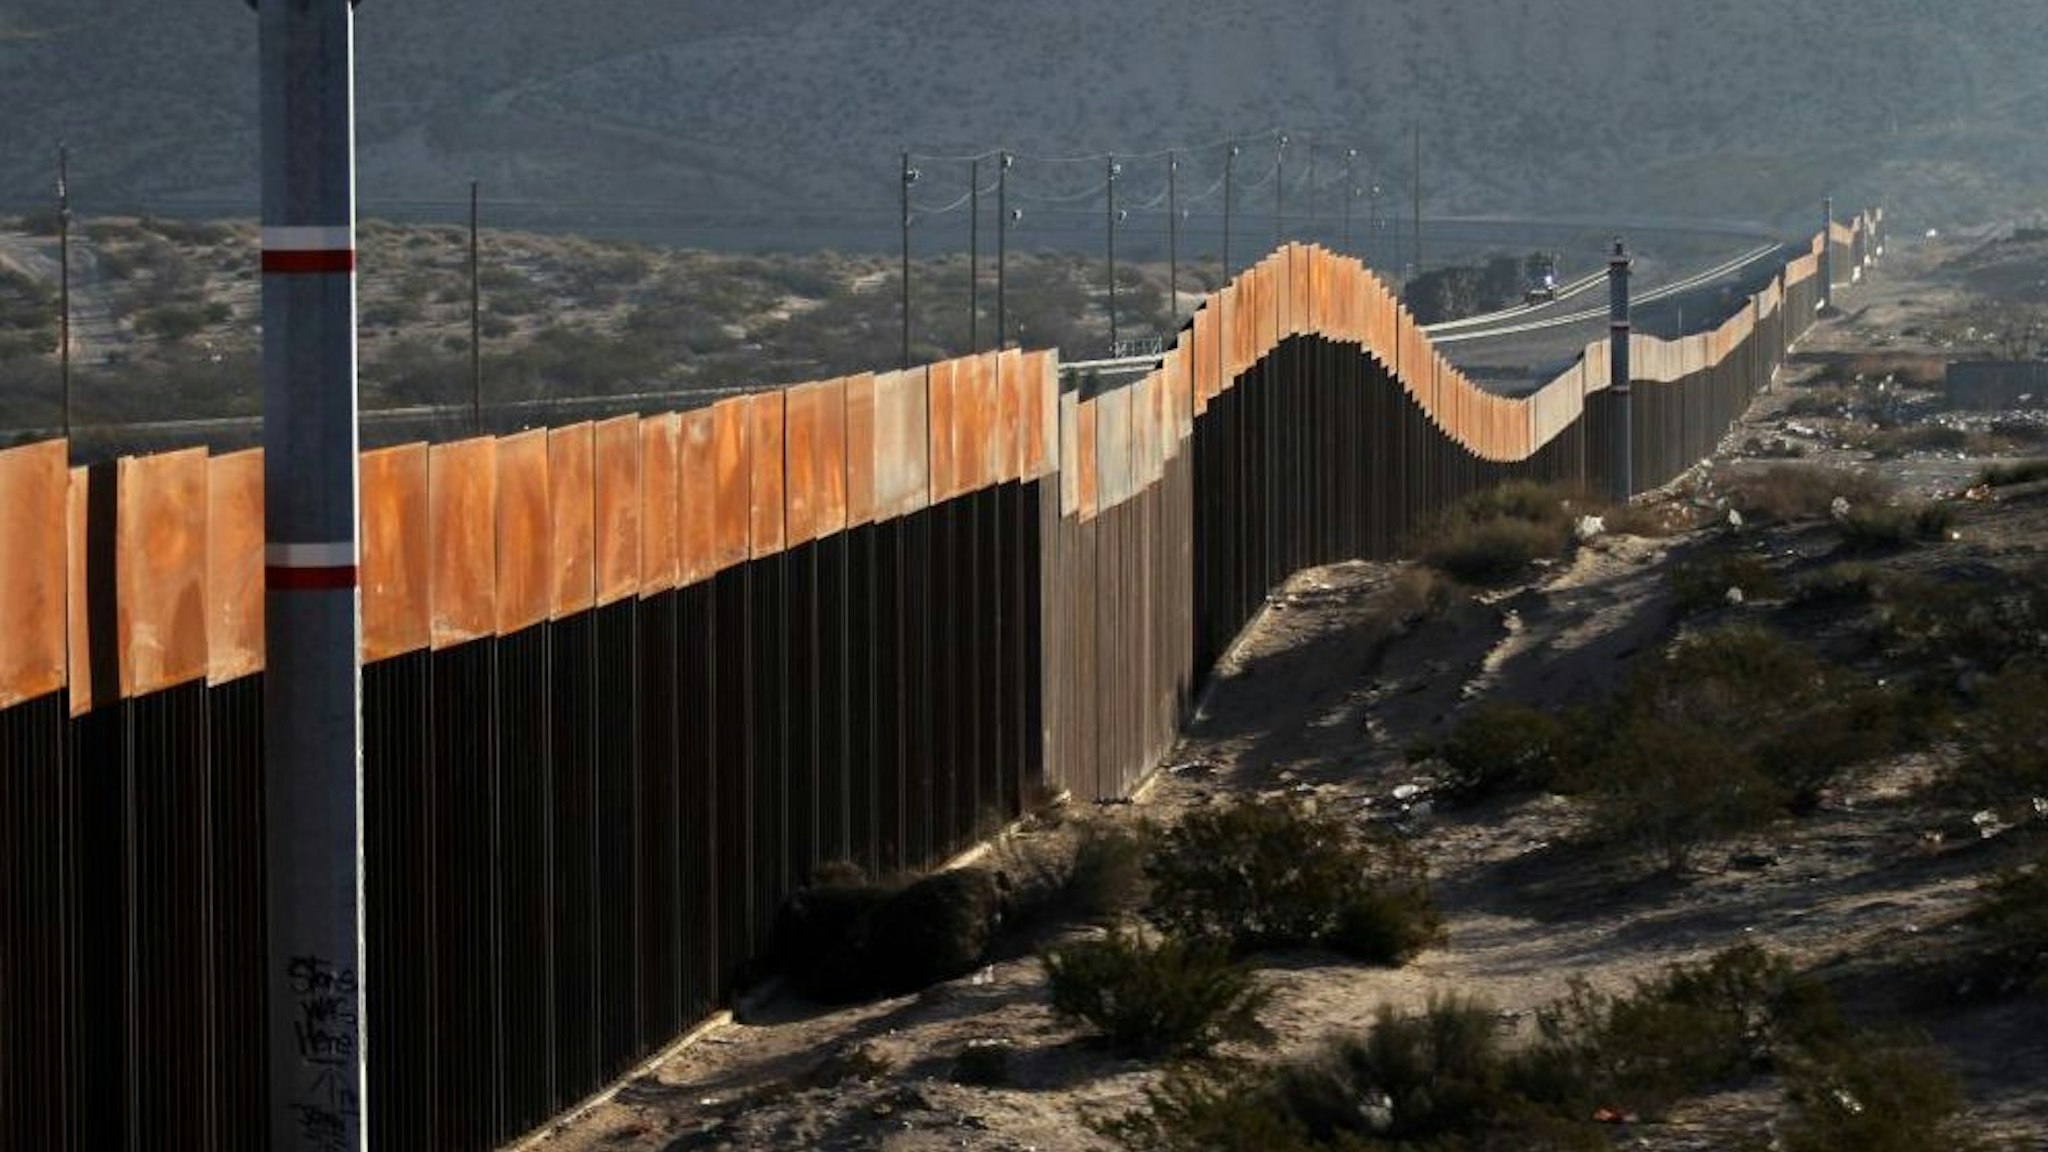 A view of the border wall between Mexico and the United States, in Ciudad Juarez, Chihuahua state, Mexico on January 19, 2018. The Mexican government reaffirmed on January 18, 2018 that they will not pay for US President Donald Trump's controversial border wall and warned that the violence in Mexico is also the result of the heavy drug consumption in the United States.